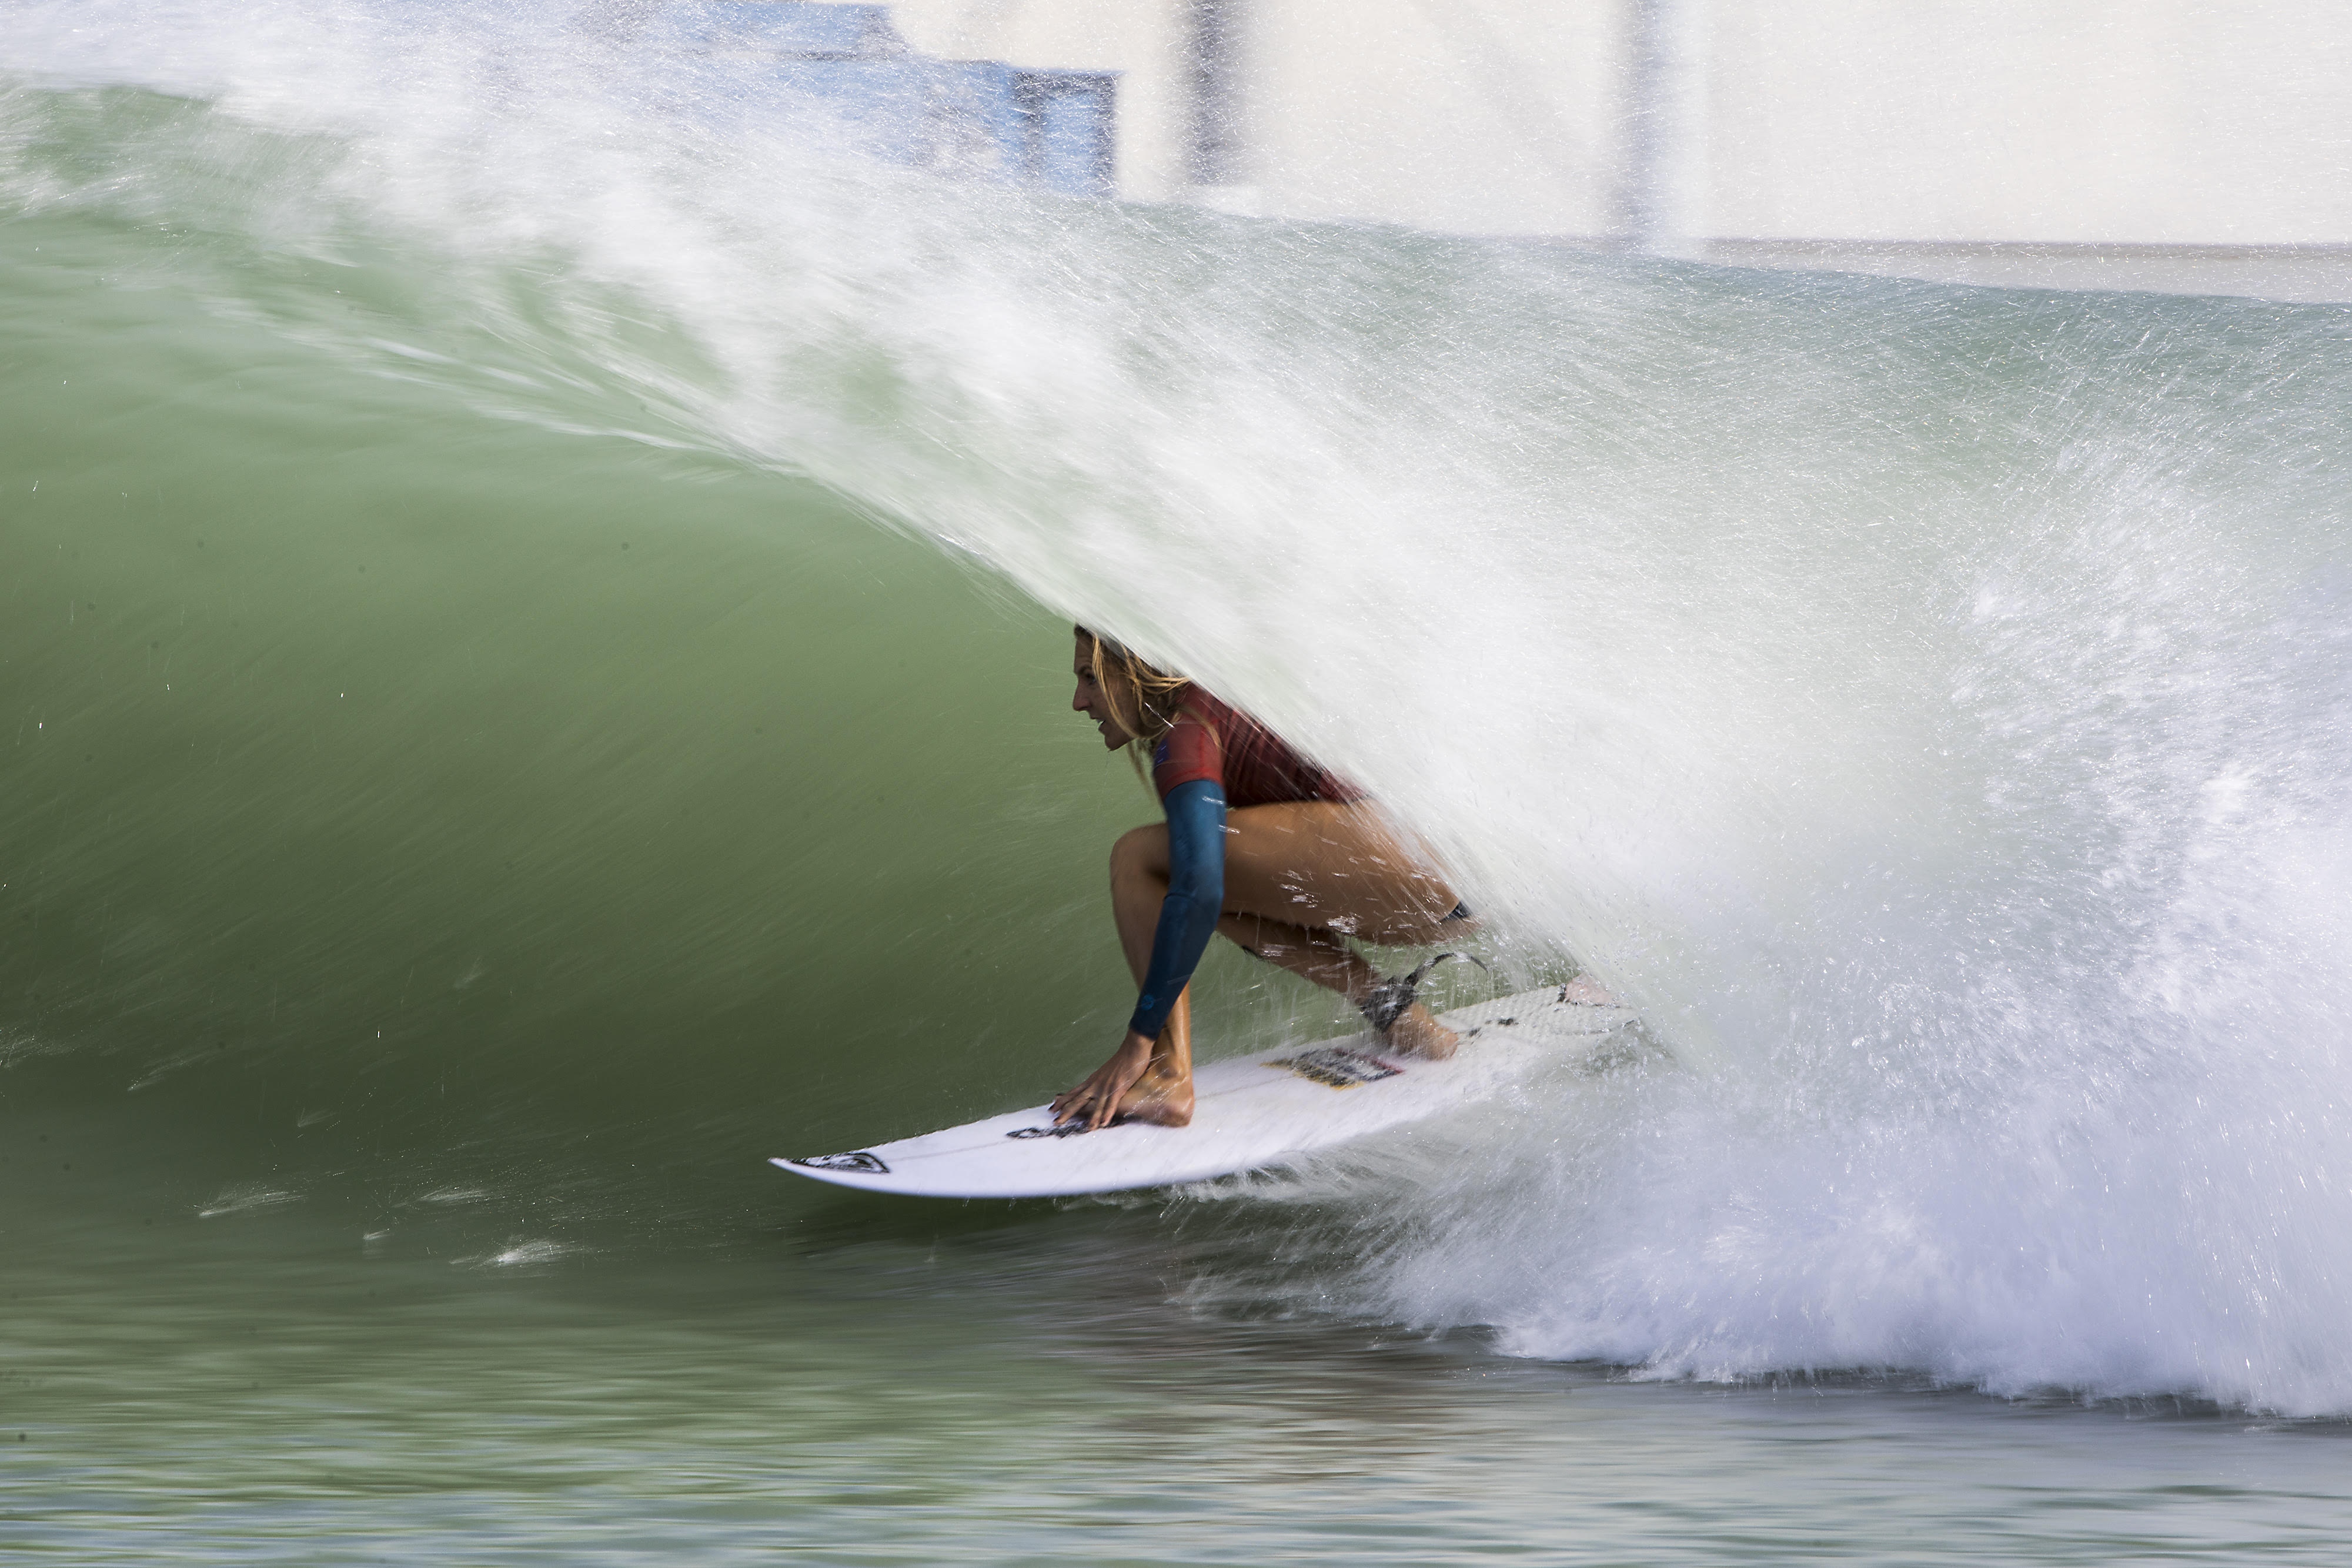 Facebook Is Exclusive Home for World Surf Leagues Live Streams